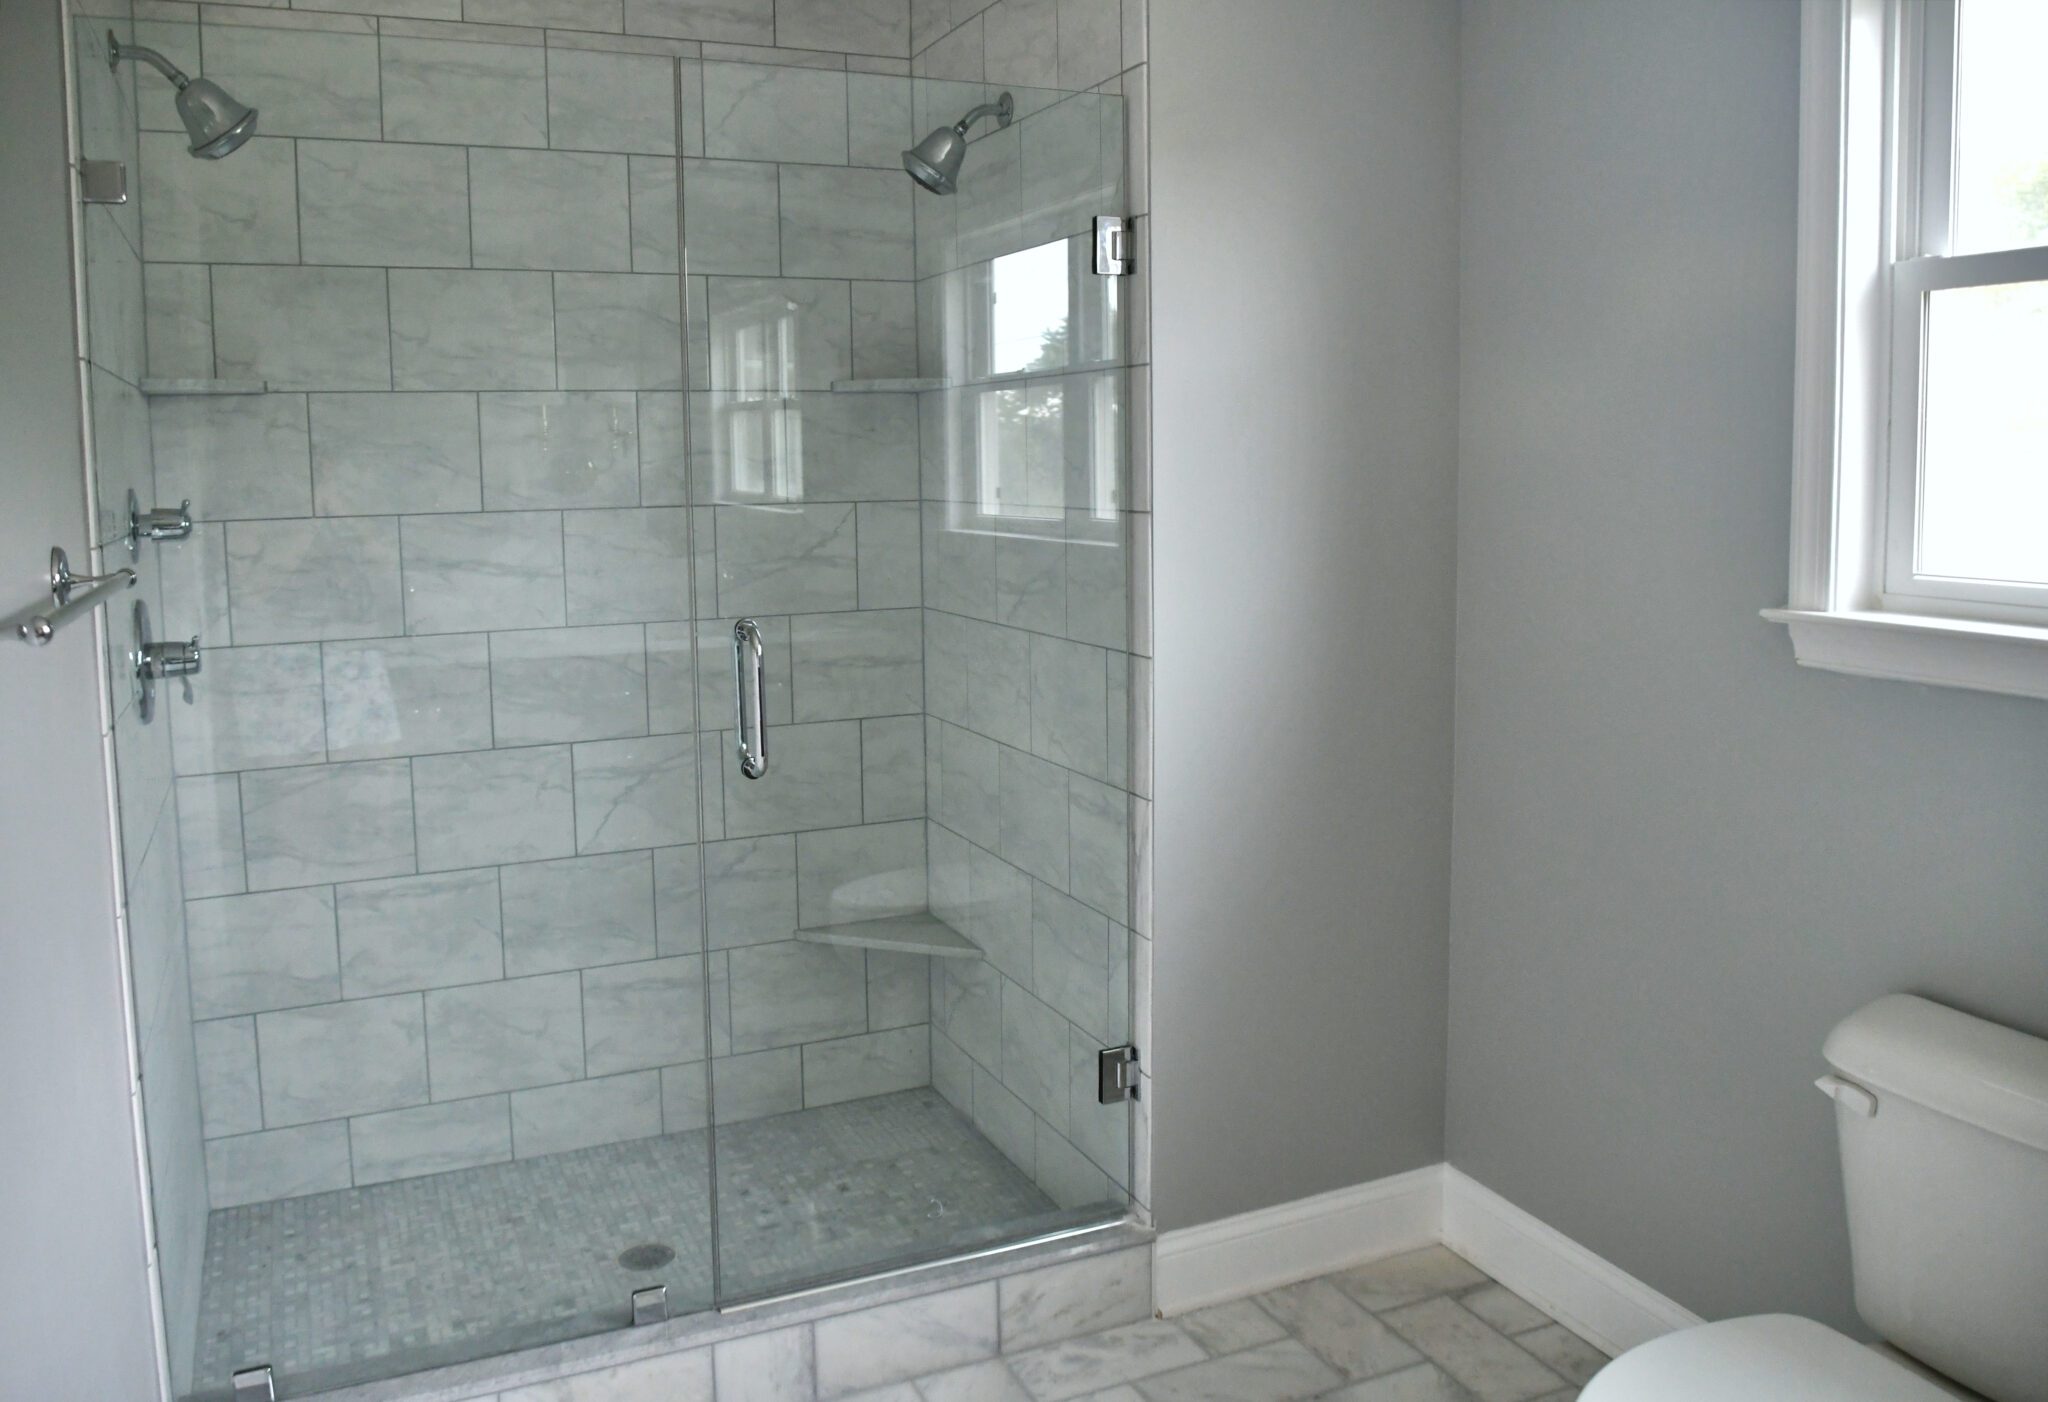 White and gray tile bathroom with new shower glass and silver hardware